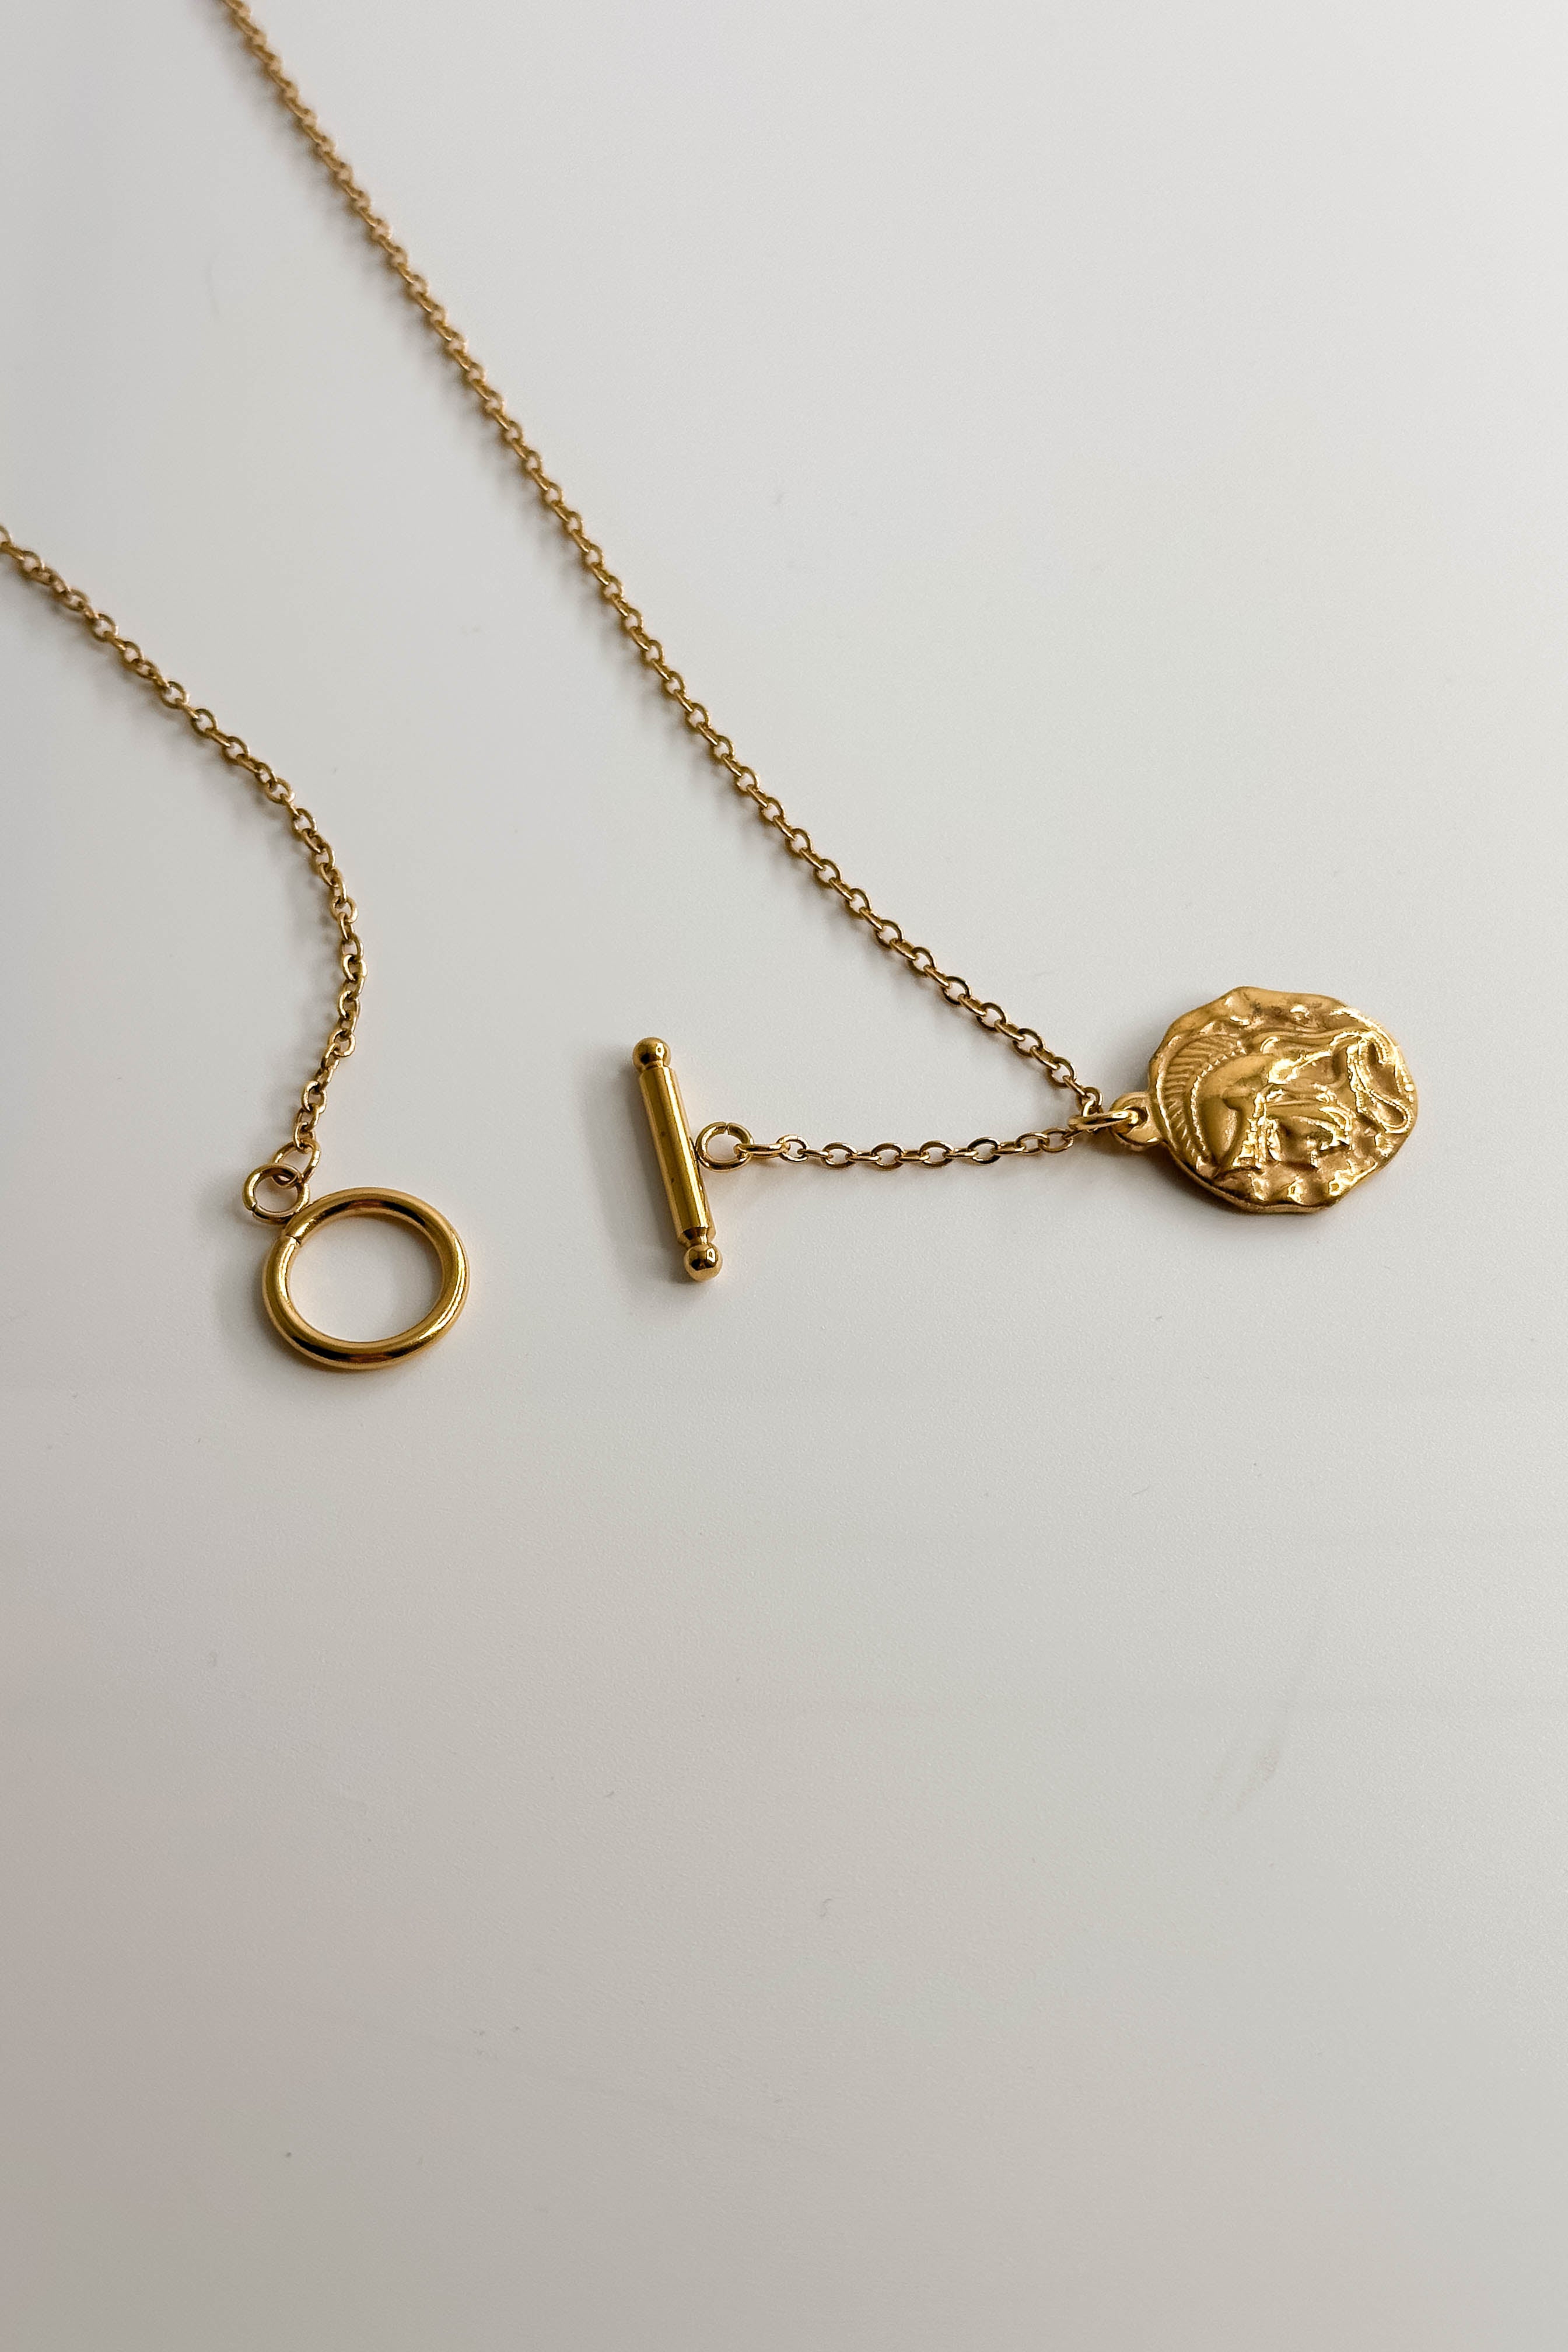 Image of the Alexandra Gold Medallion Necklace against a white background. Necklace has gold chain with toggle closure and gold circle medallion with side profile of a gladiator. Necklae is shown unhooked.